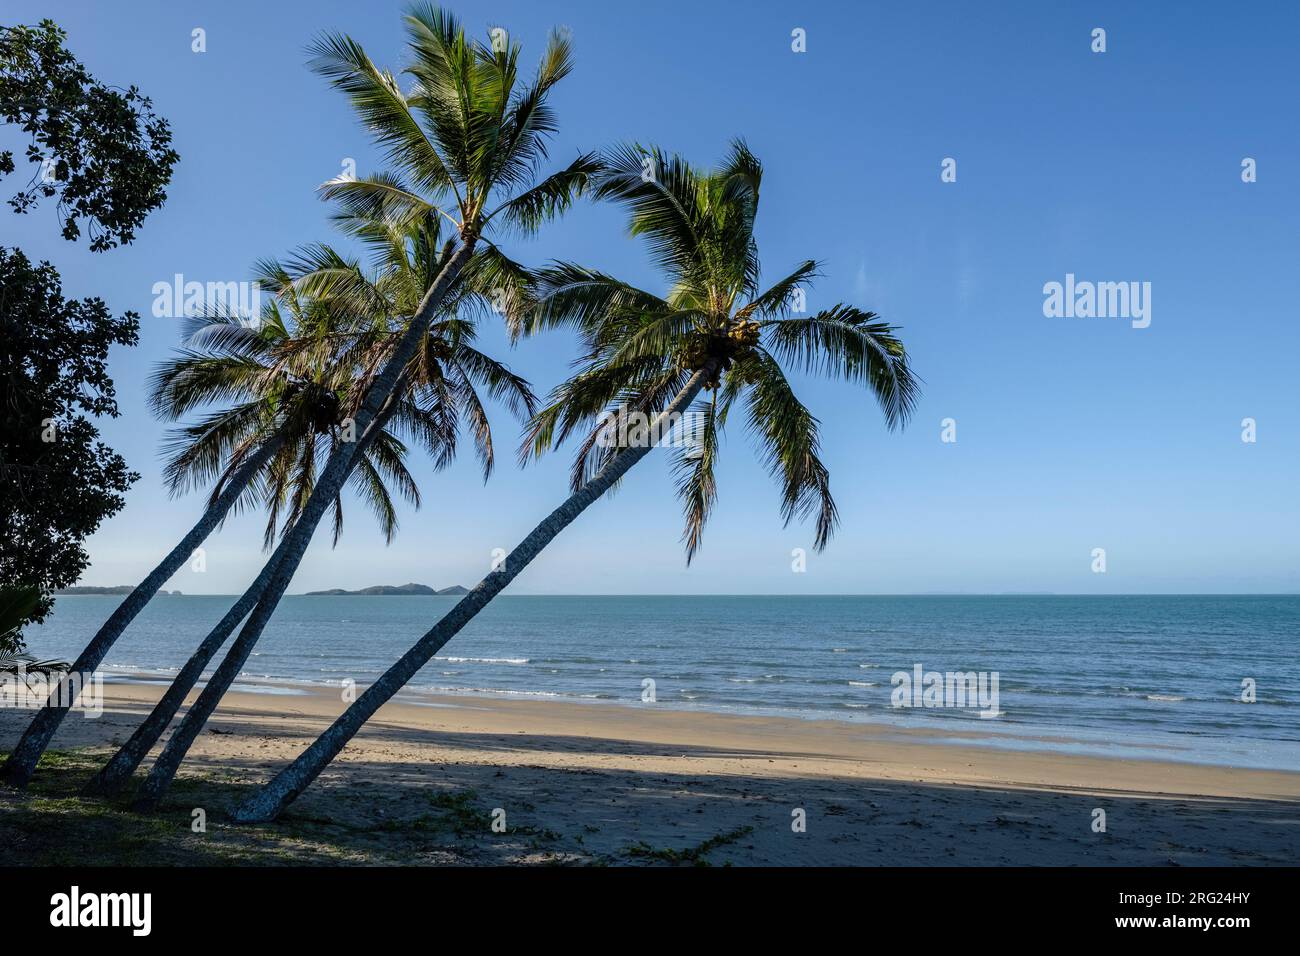 Coconut palms at Seaforth Beach on the Hibiscus Coast of Tropical North Queensland, Australia Stock Photo